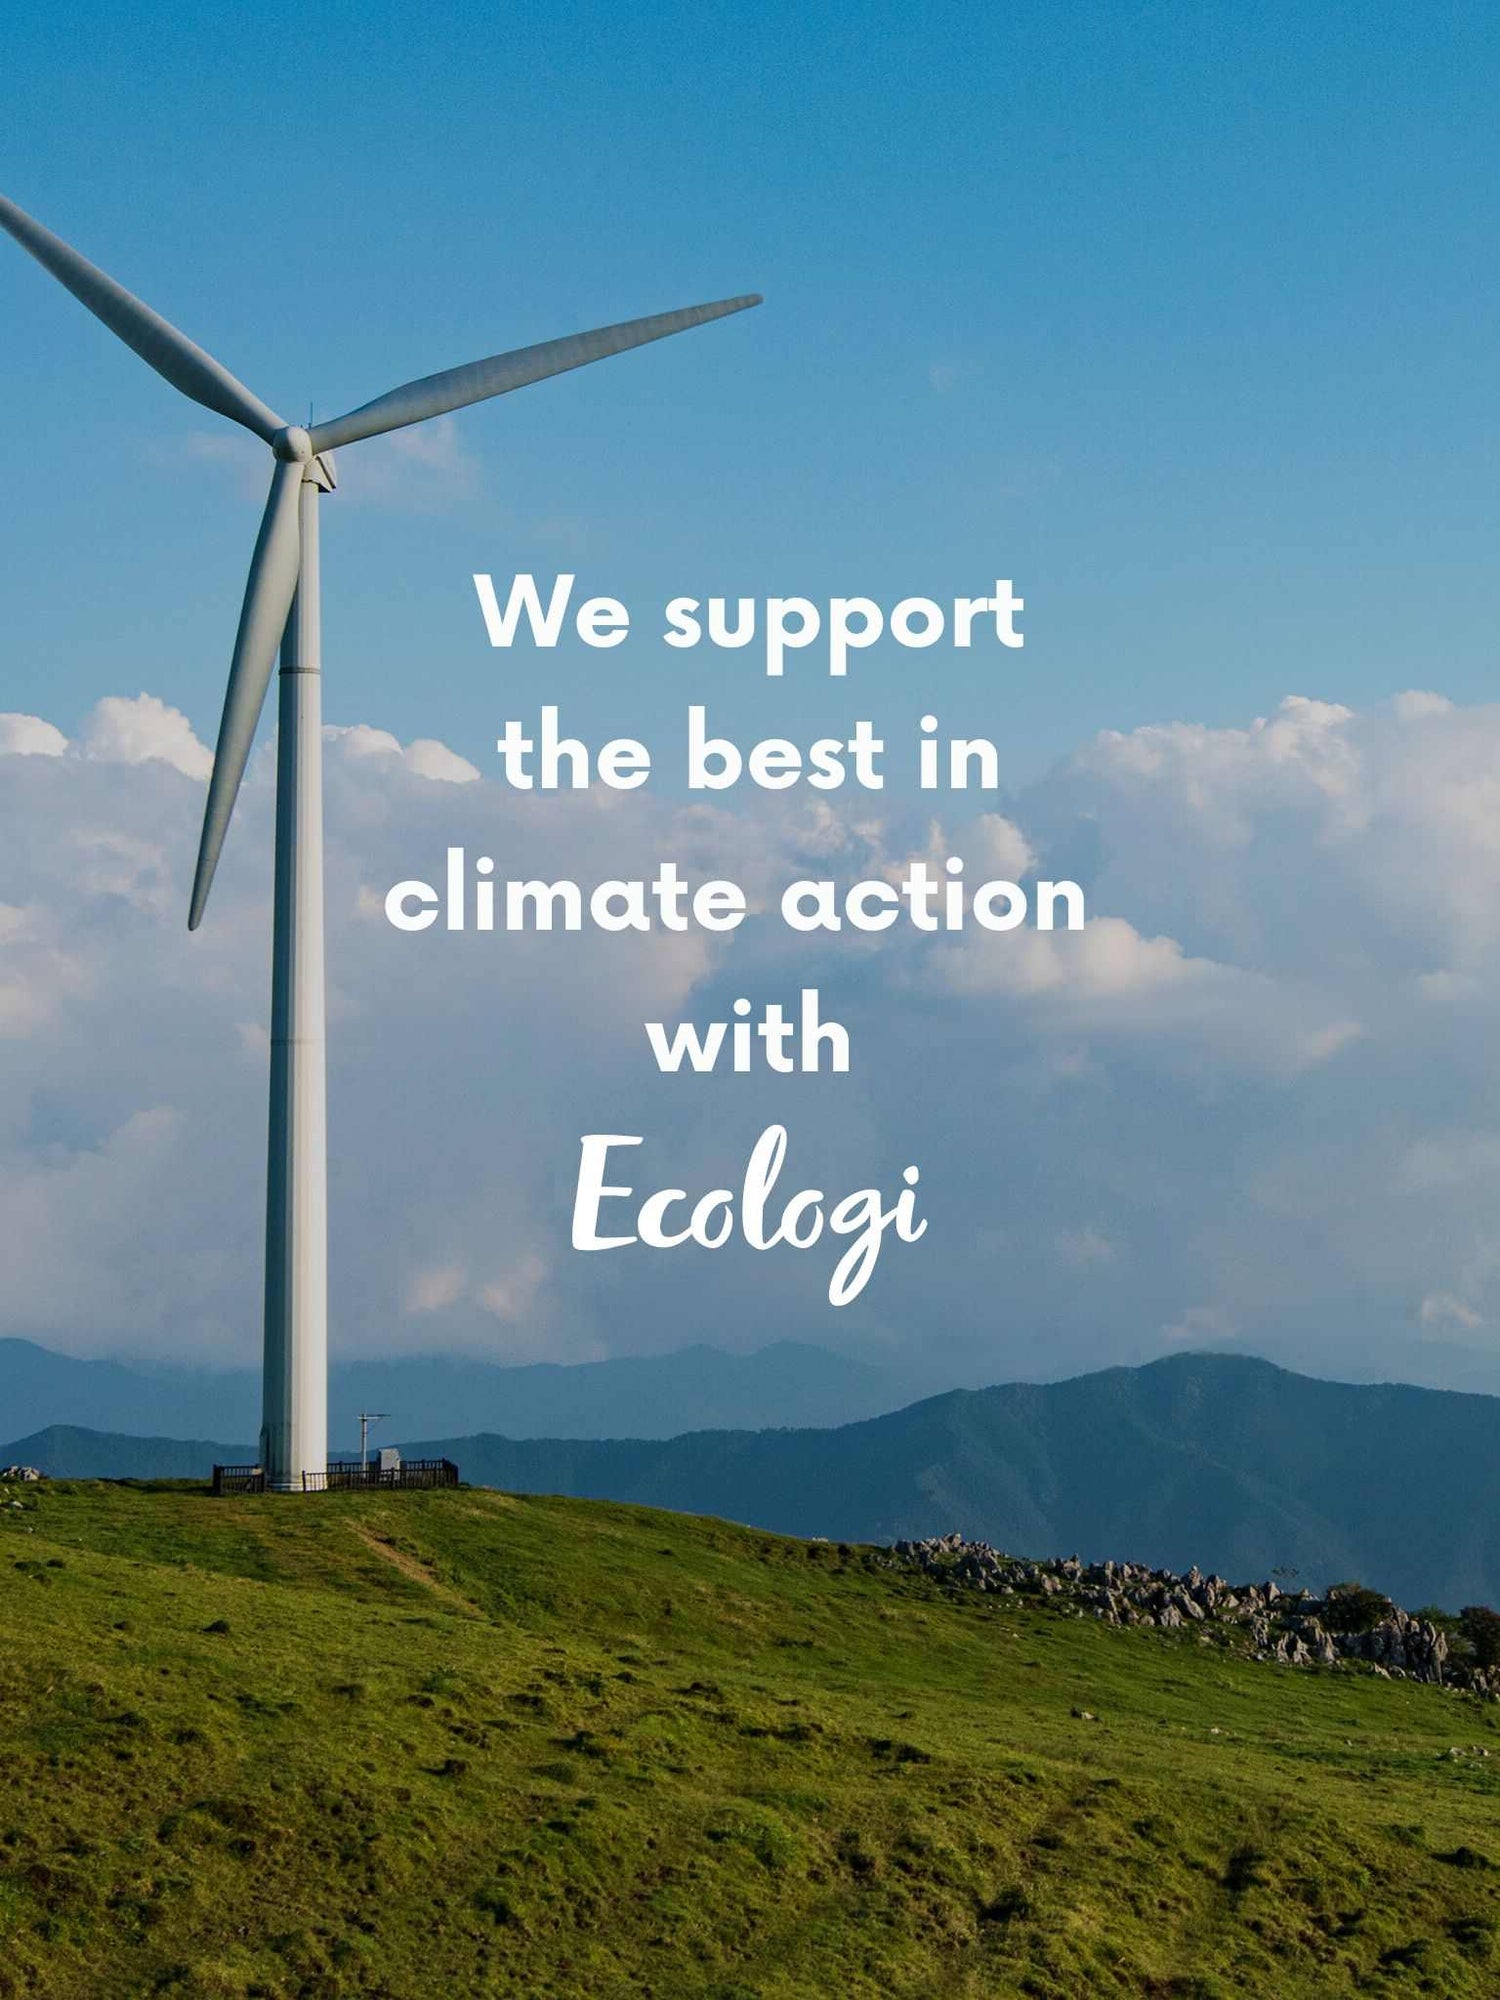 Lavender & Lemon supports the best in climate action with Ecologi.